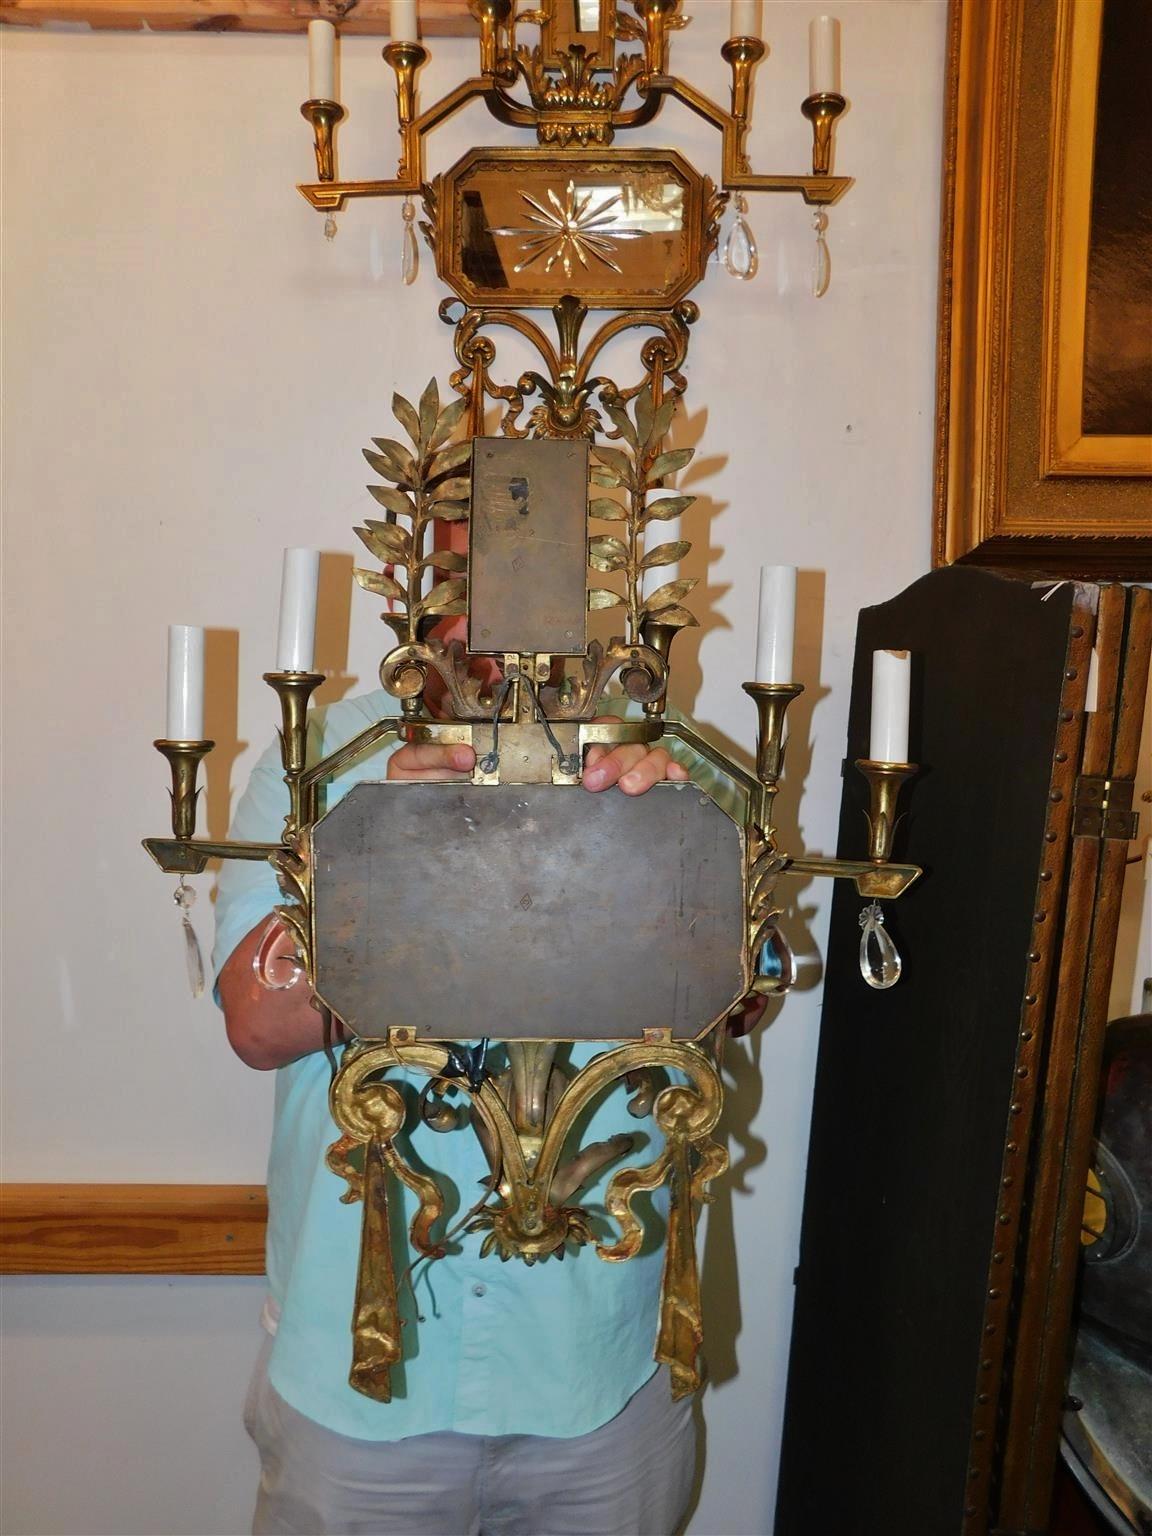 Pair of American Gilt Bronze & Star Mirrored Wall Sconces, Caldwell & Co. C 1870 For Sale 3